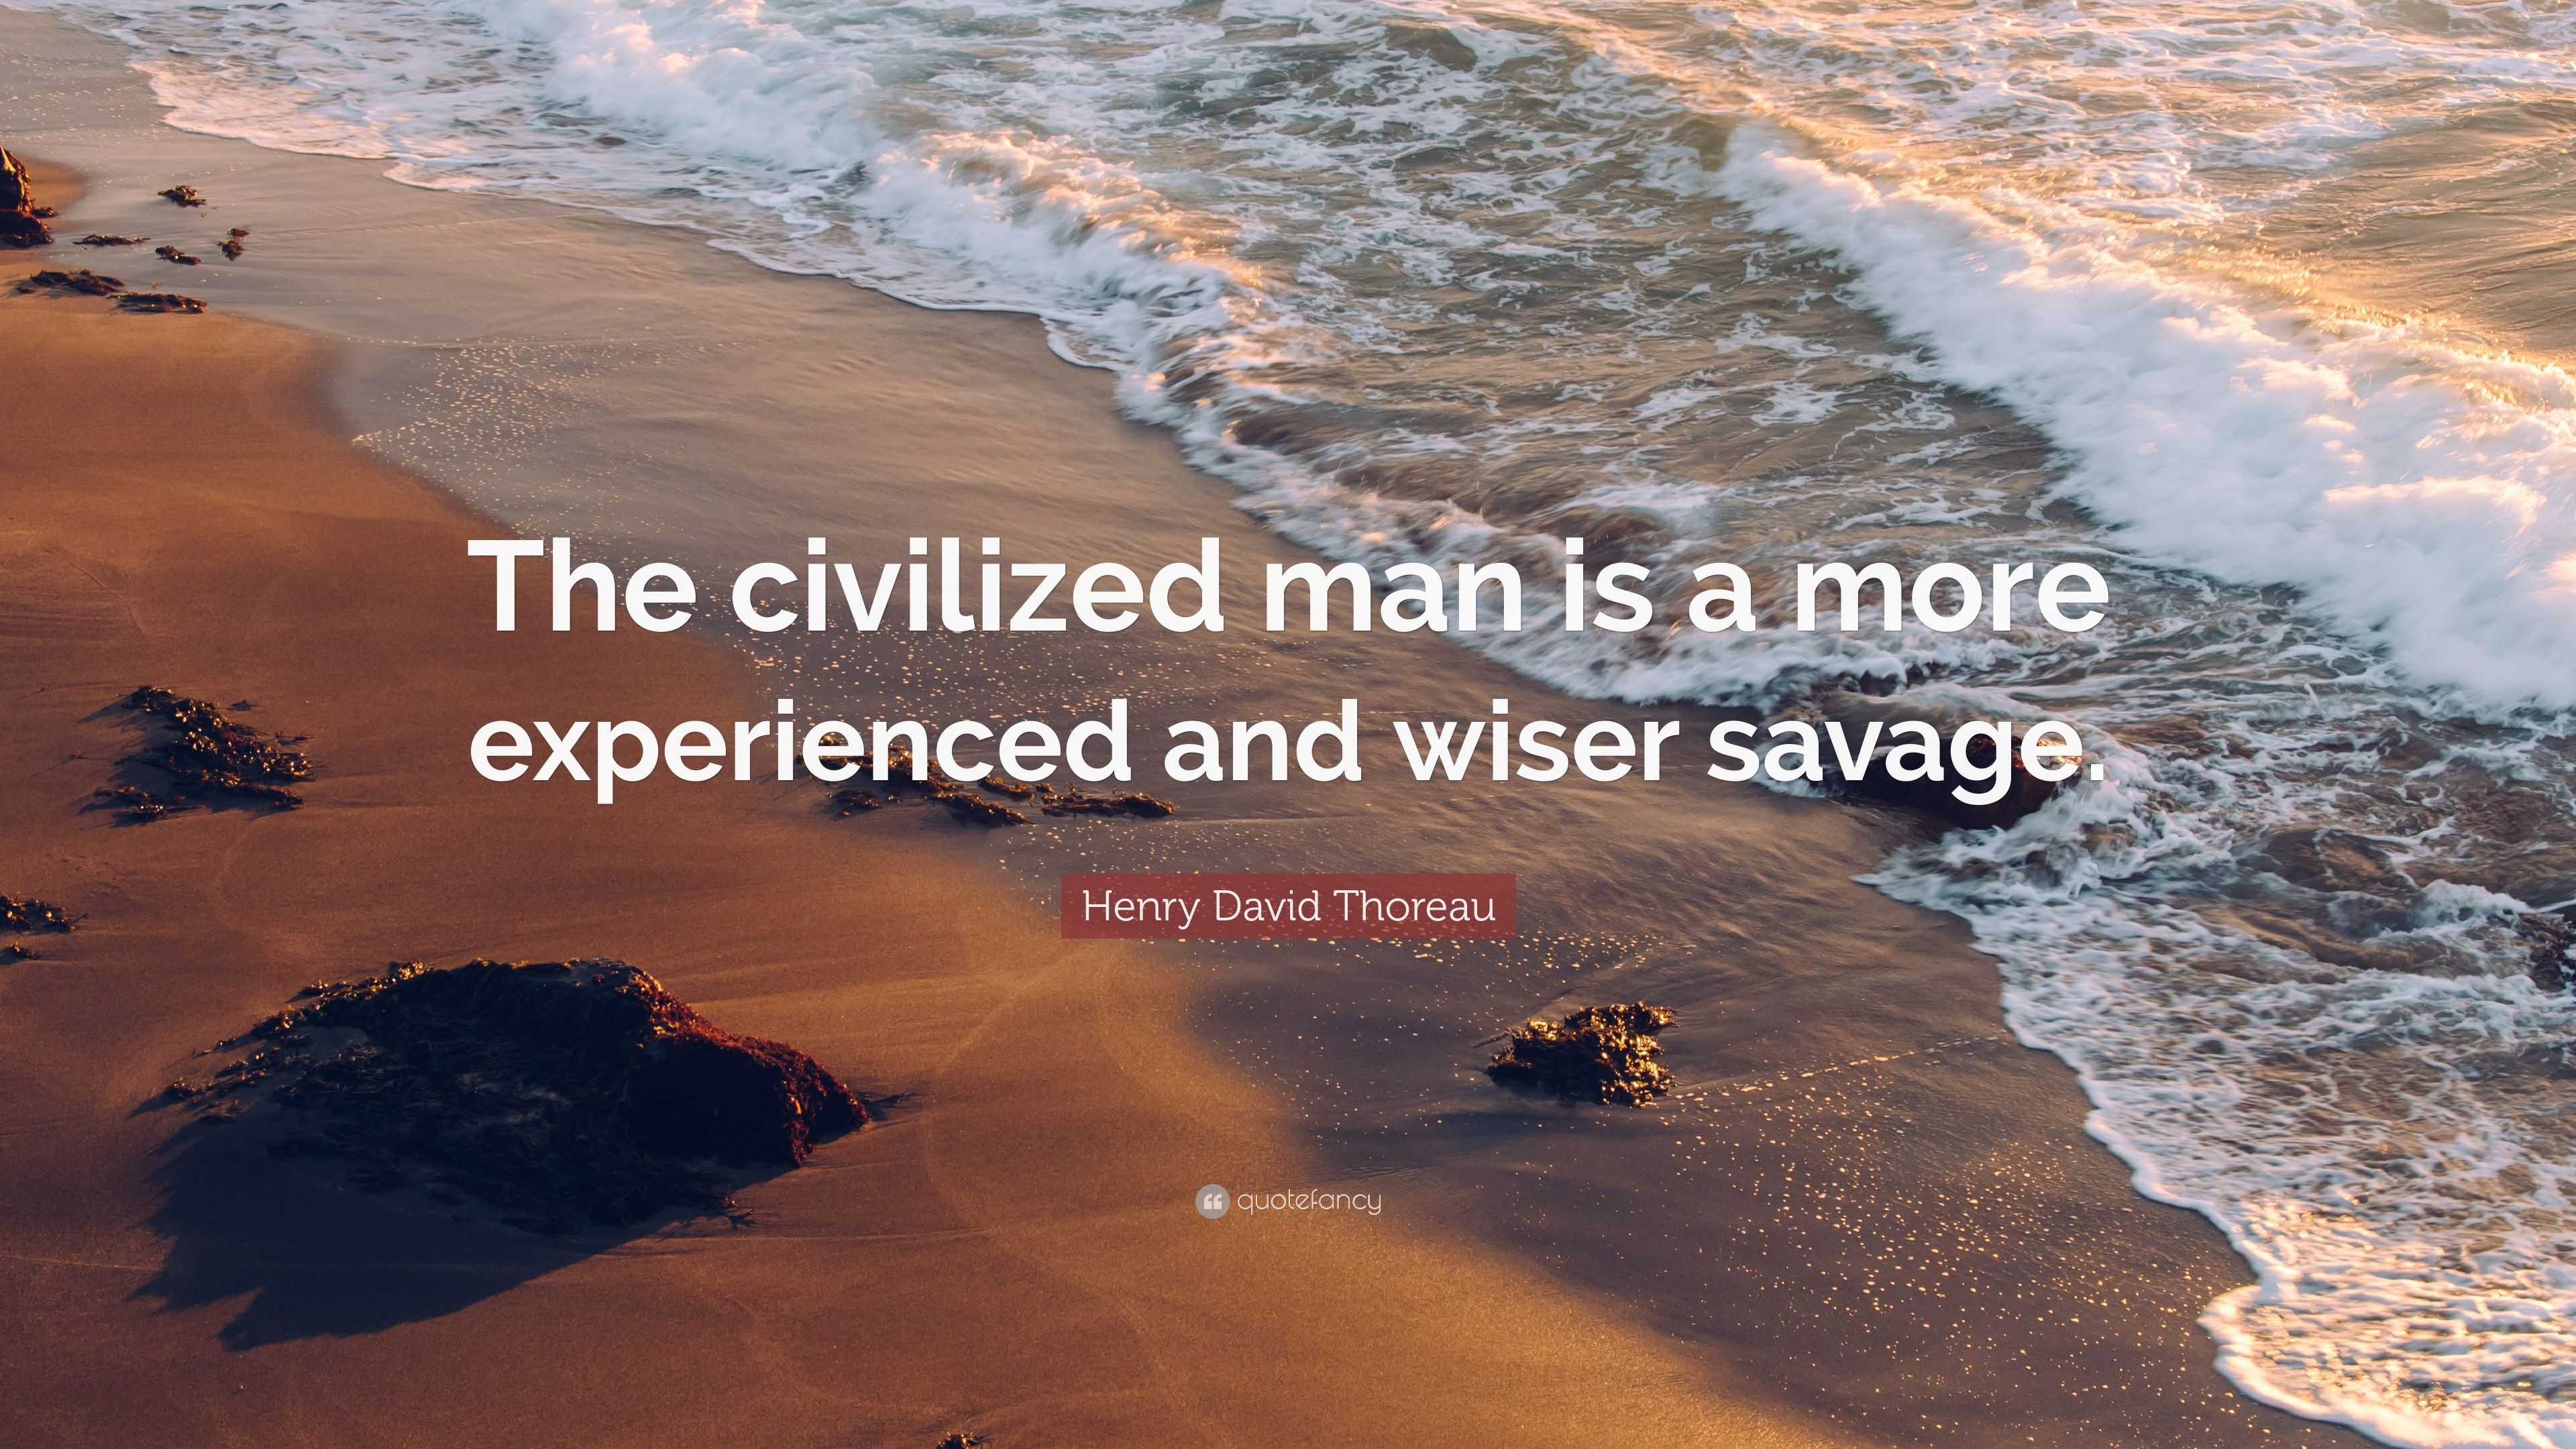 Henry David Thoreau Quote “the Civilized Man Is A More Experienced And Wiser Savage ”